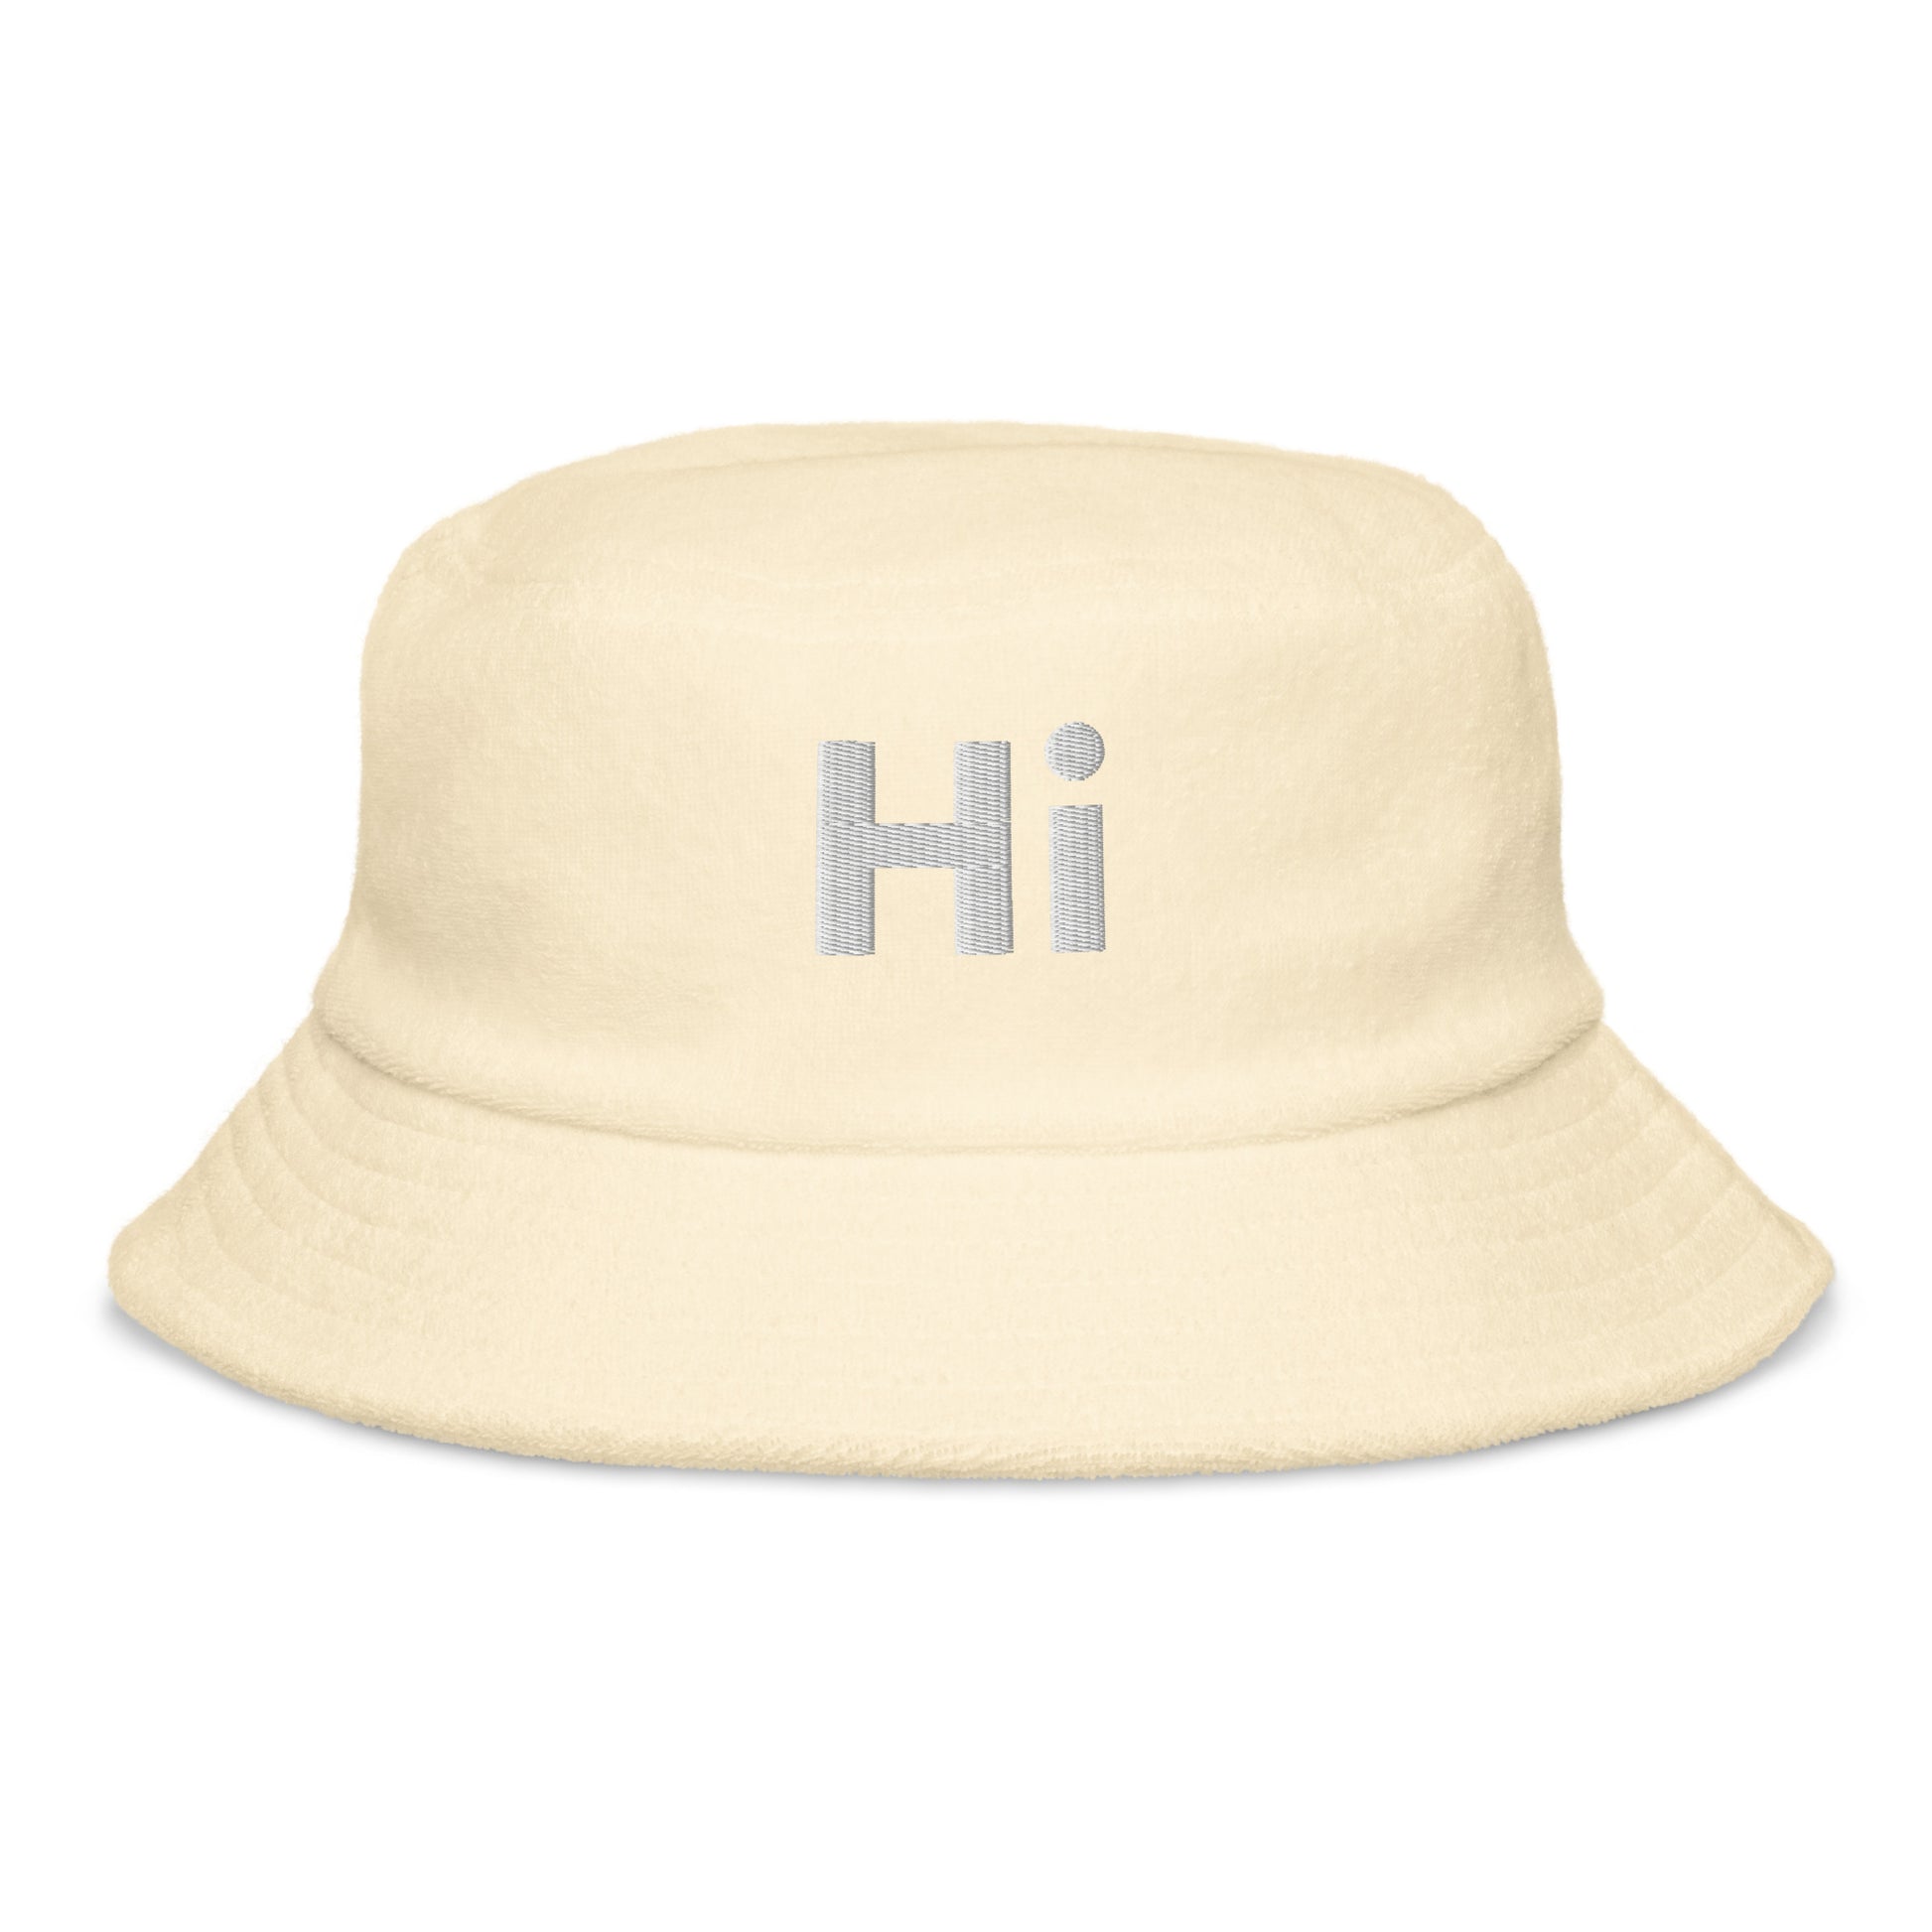 Hi Fuzzy Bucket Hat in yellow by Johnny Michael at HiJohnny.com. It’s fuzzy, fashionable and friendly. Put it on your head and go greet the world.